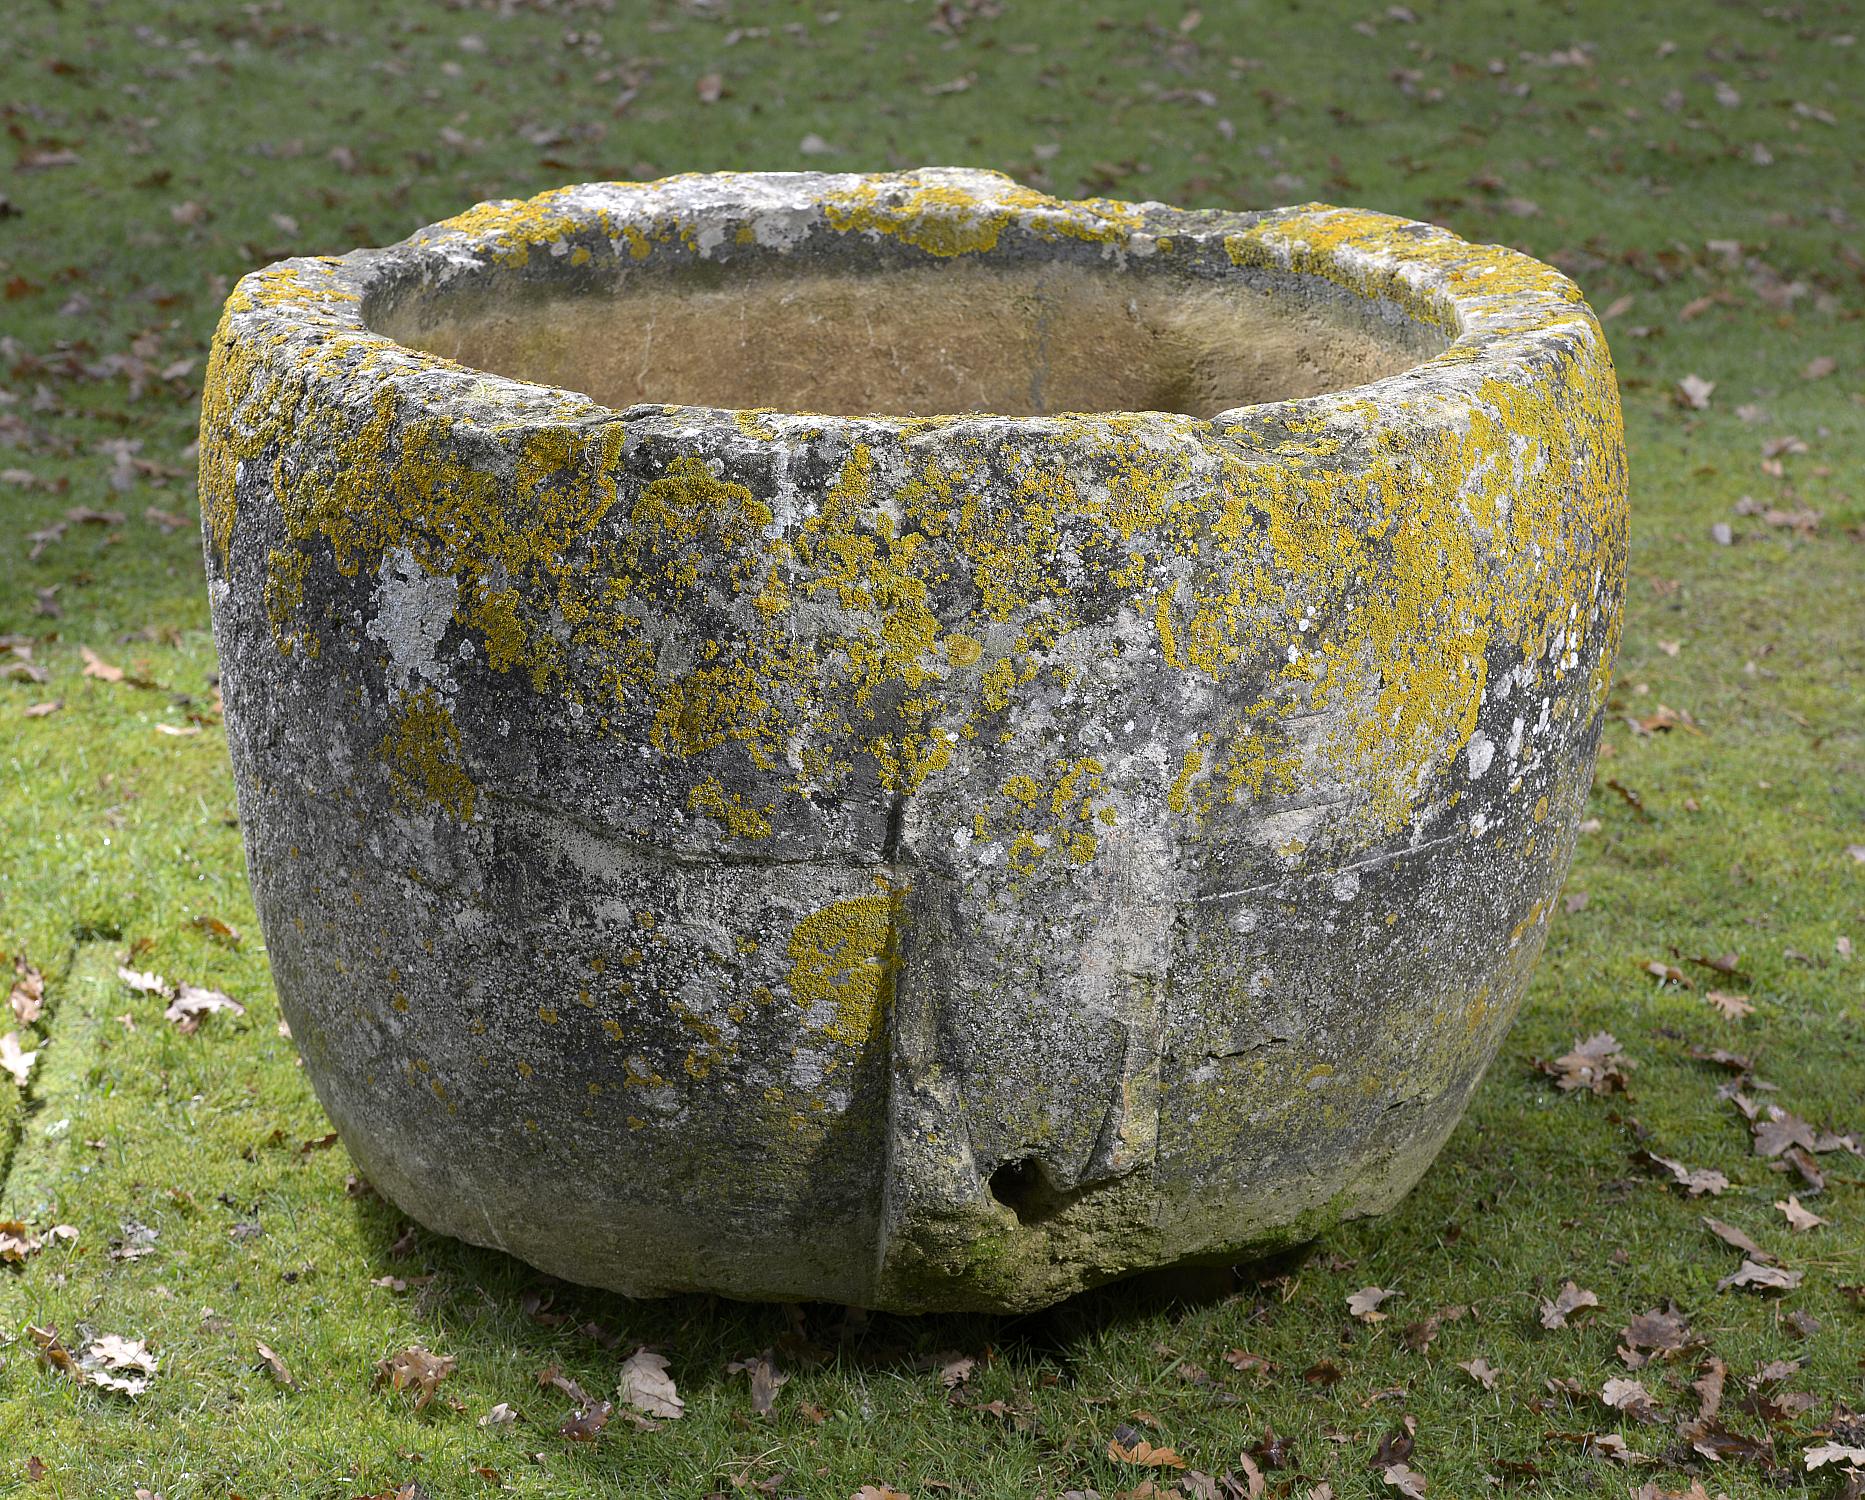 Planter/Water Feature: A circular carved limestone trough 63cm high by 100cm diameter